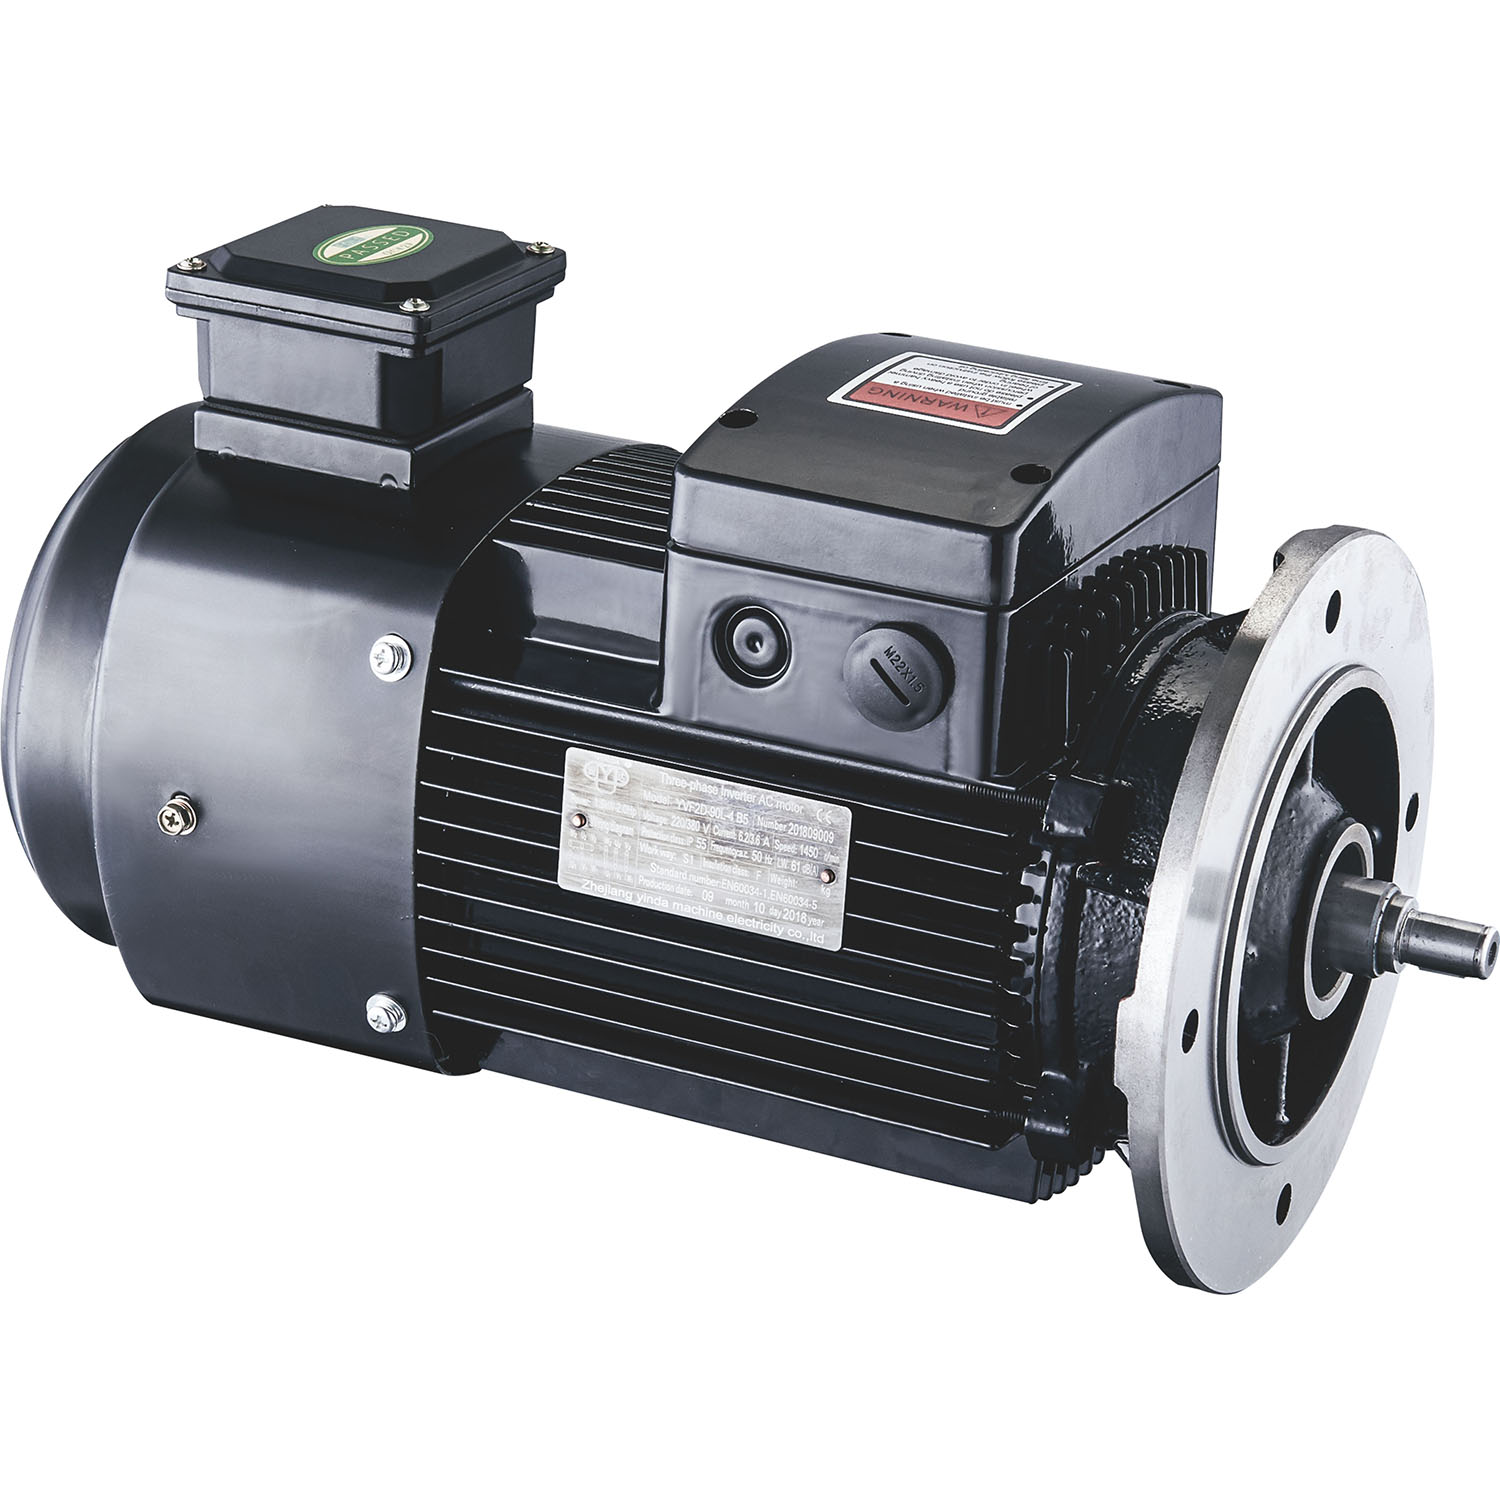 4KW-6P hard tooth surface reducer Four series of high efficiency motors